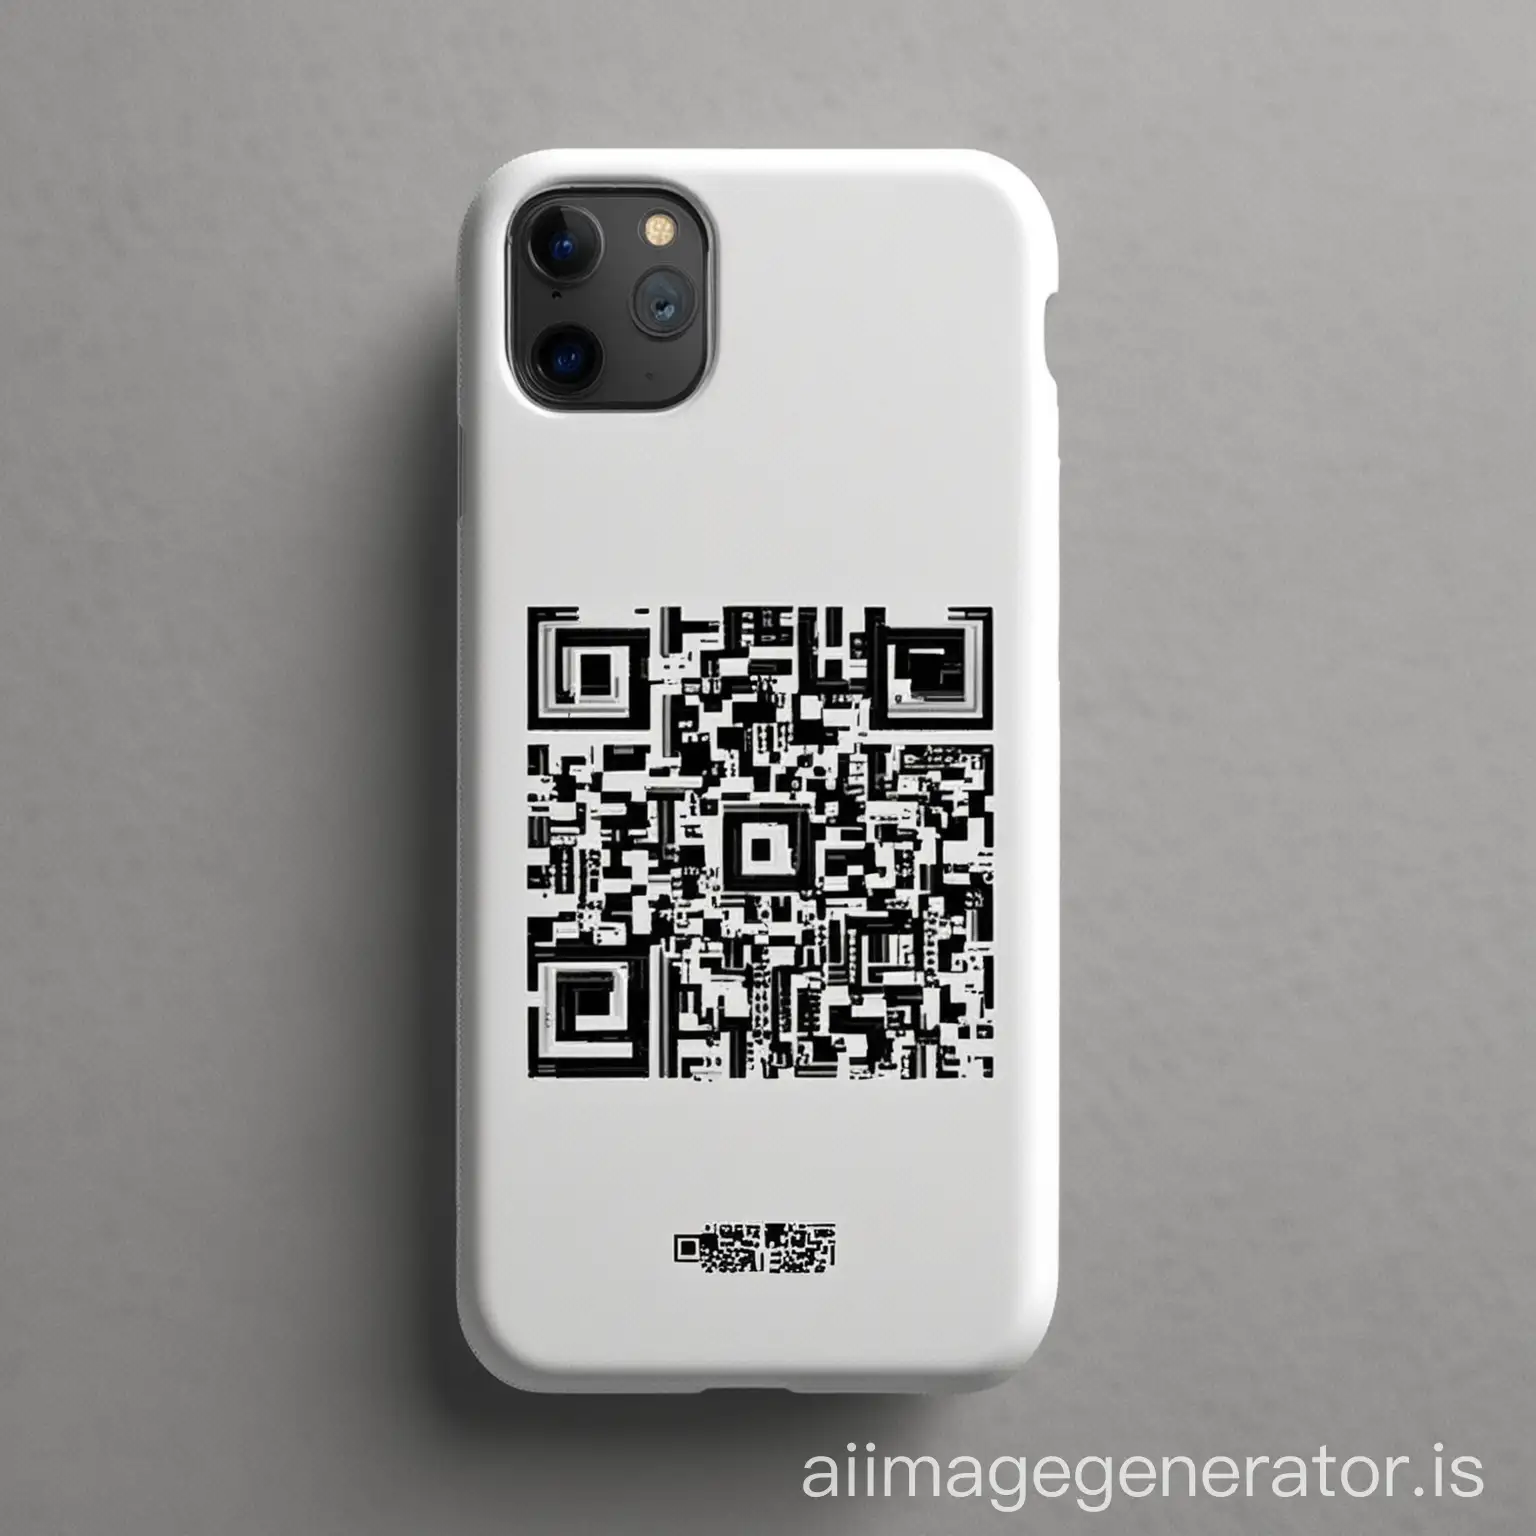 Modern-White-Phone-Case-Design-with-Custom-QR-Code-and-Instagram-Handle